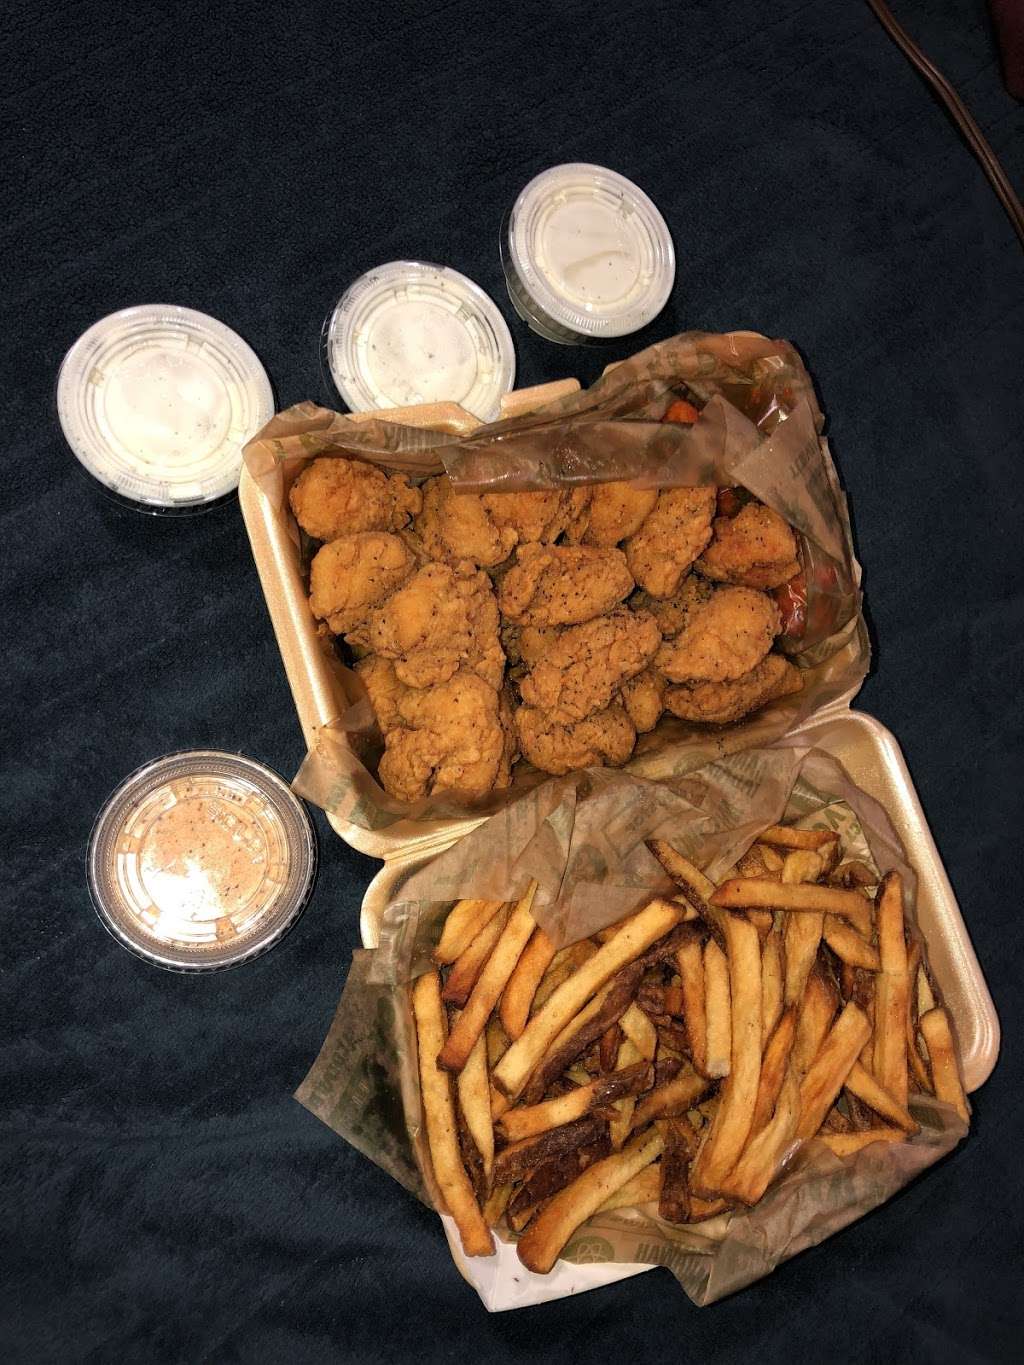 Wingstop | 7953 S Cicero Ave, Chicago, IL 60652, USA | Phone: (773) 838-9464